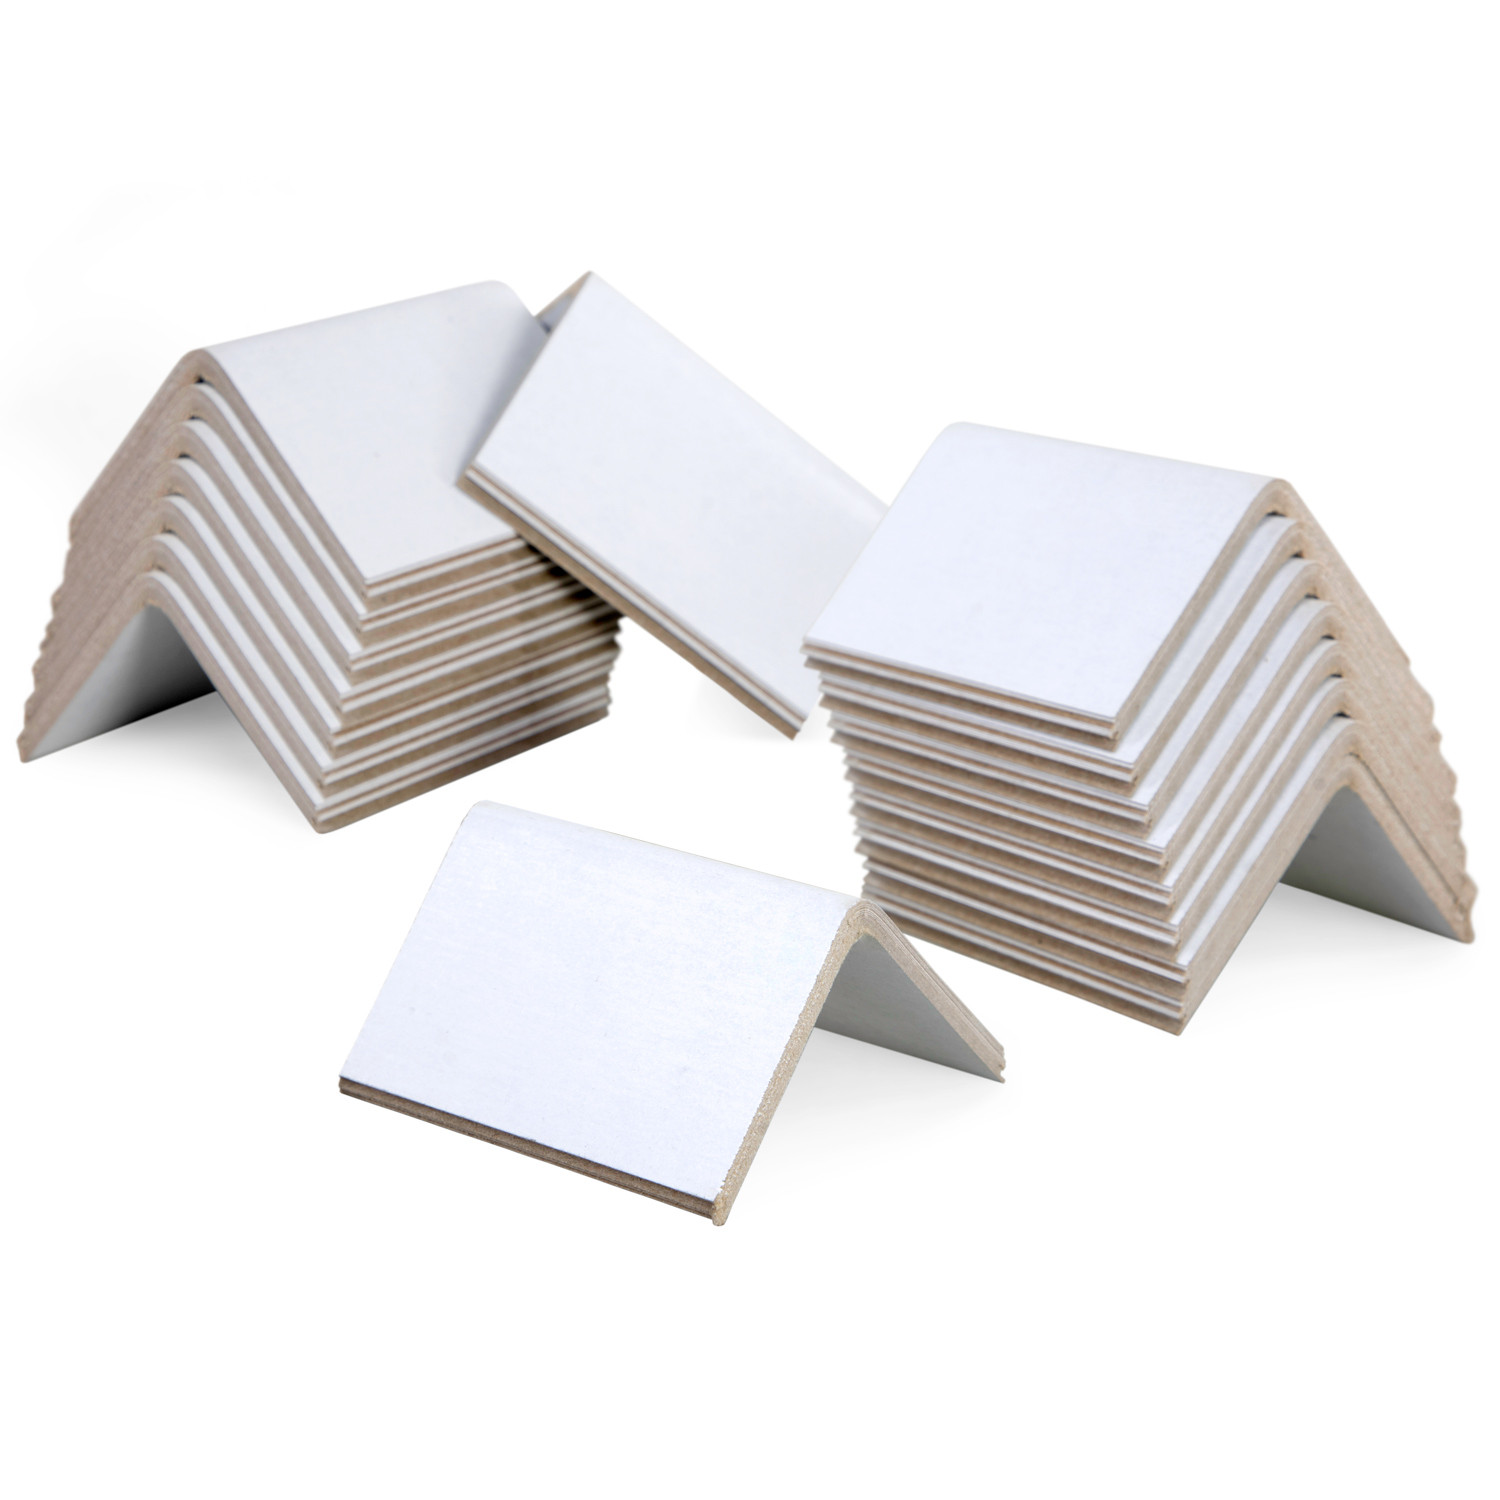 Idl Packaging Cardboard Edge Protectors 2 inch x 2 inch x 3 inch, Pack of 50, White, 0.160 inch Thick